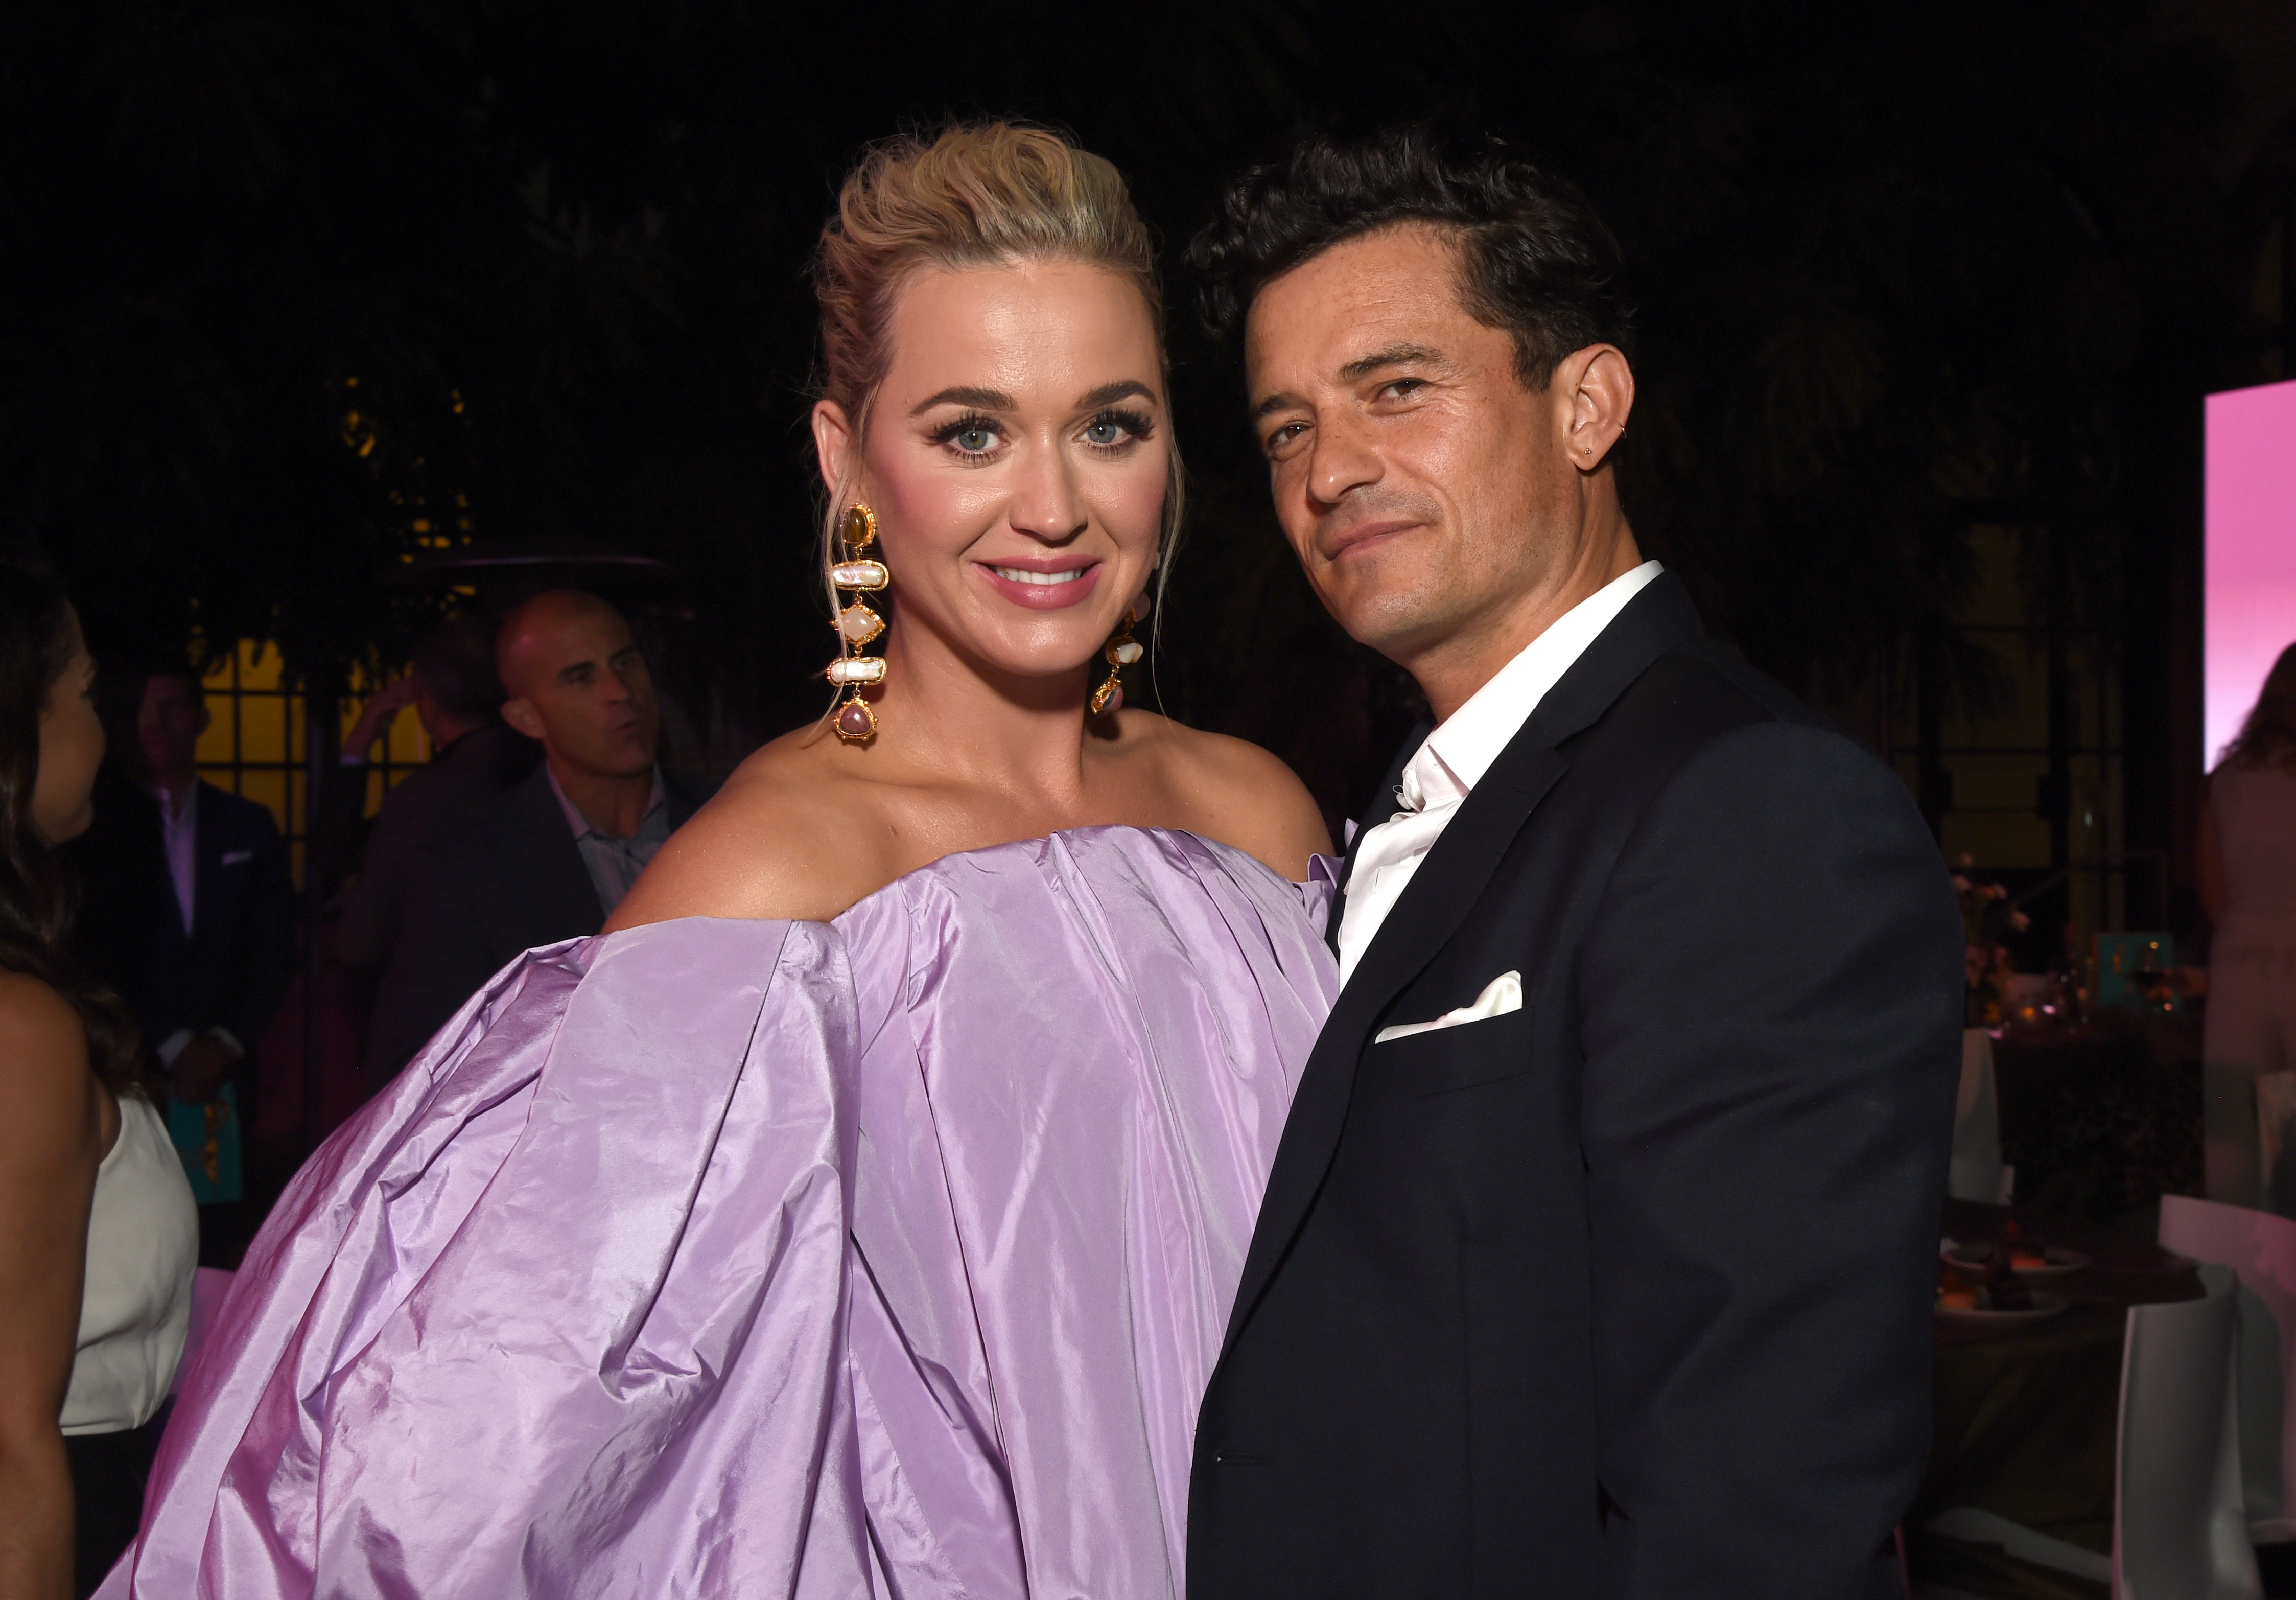 Katy Perry and Orlando Bloom at Variety's Power of Women event in Los Angeles, California on September 30, 2021 | Source: Getty Images